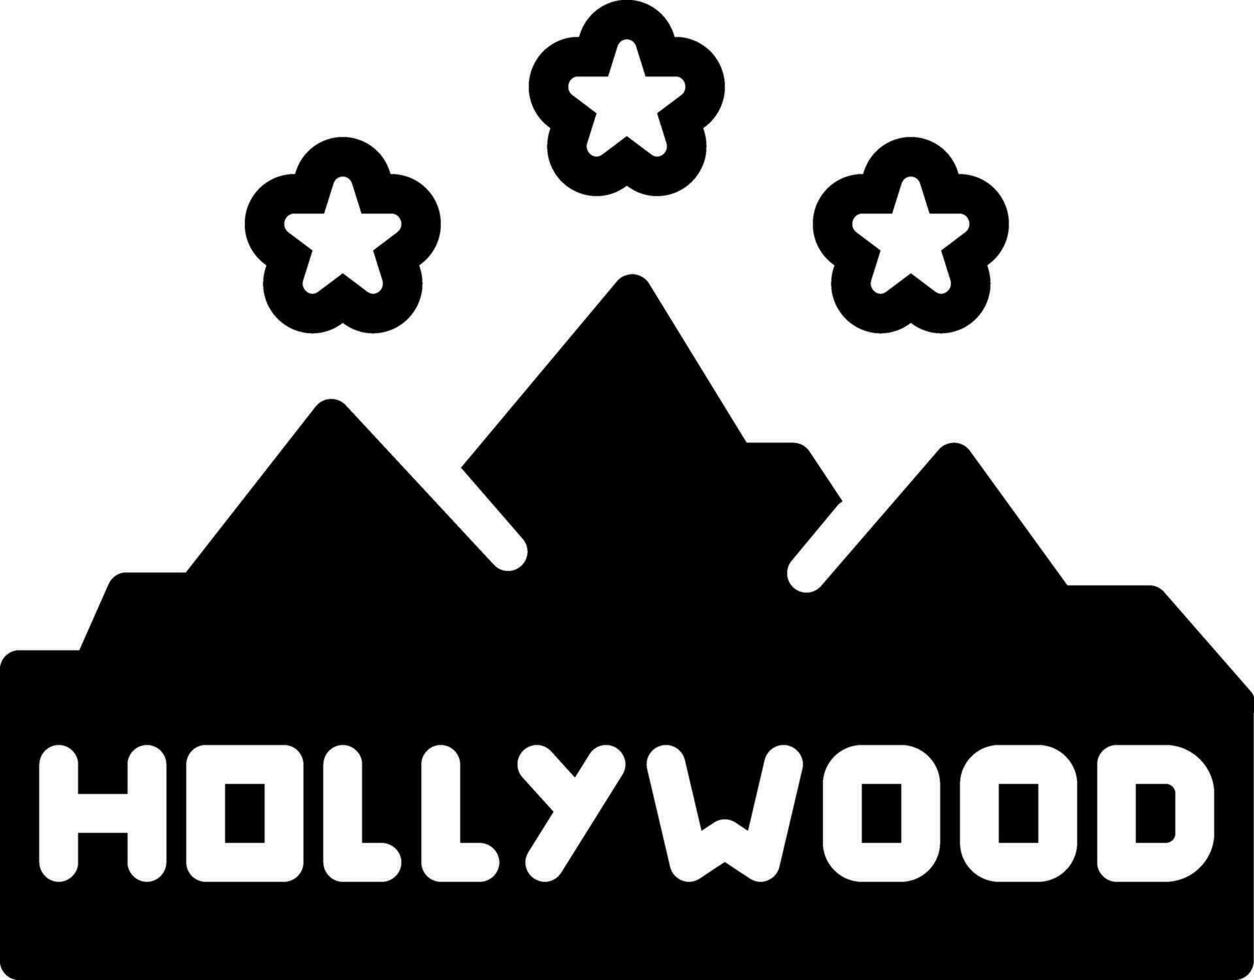 solid icon for hollywood vector